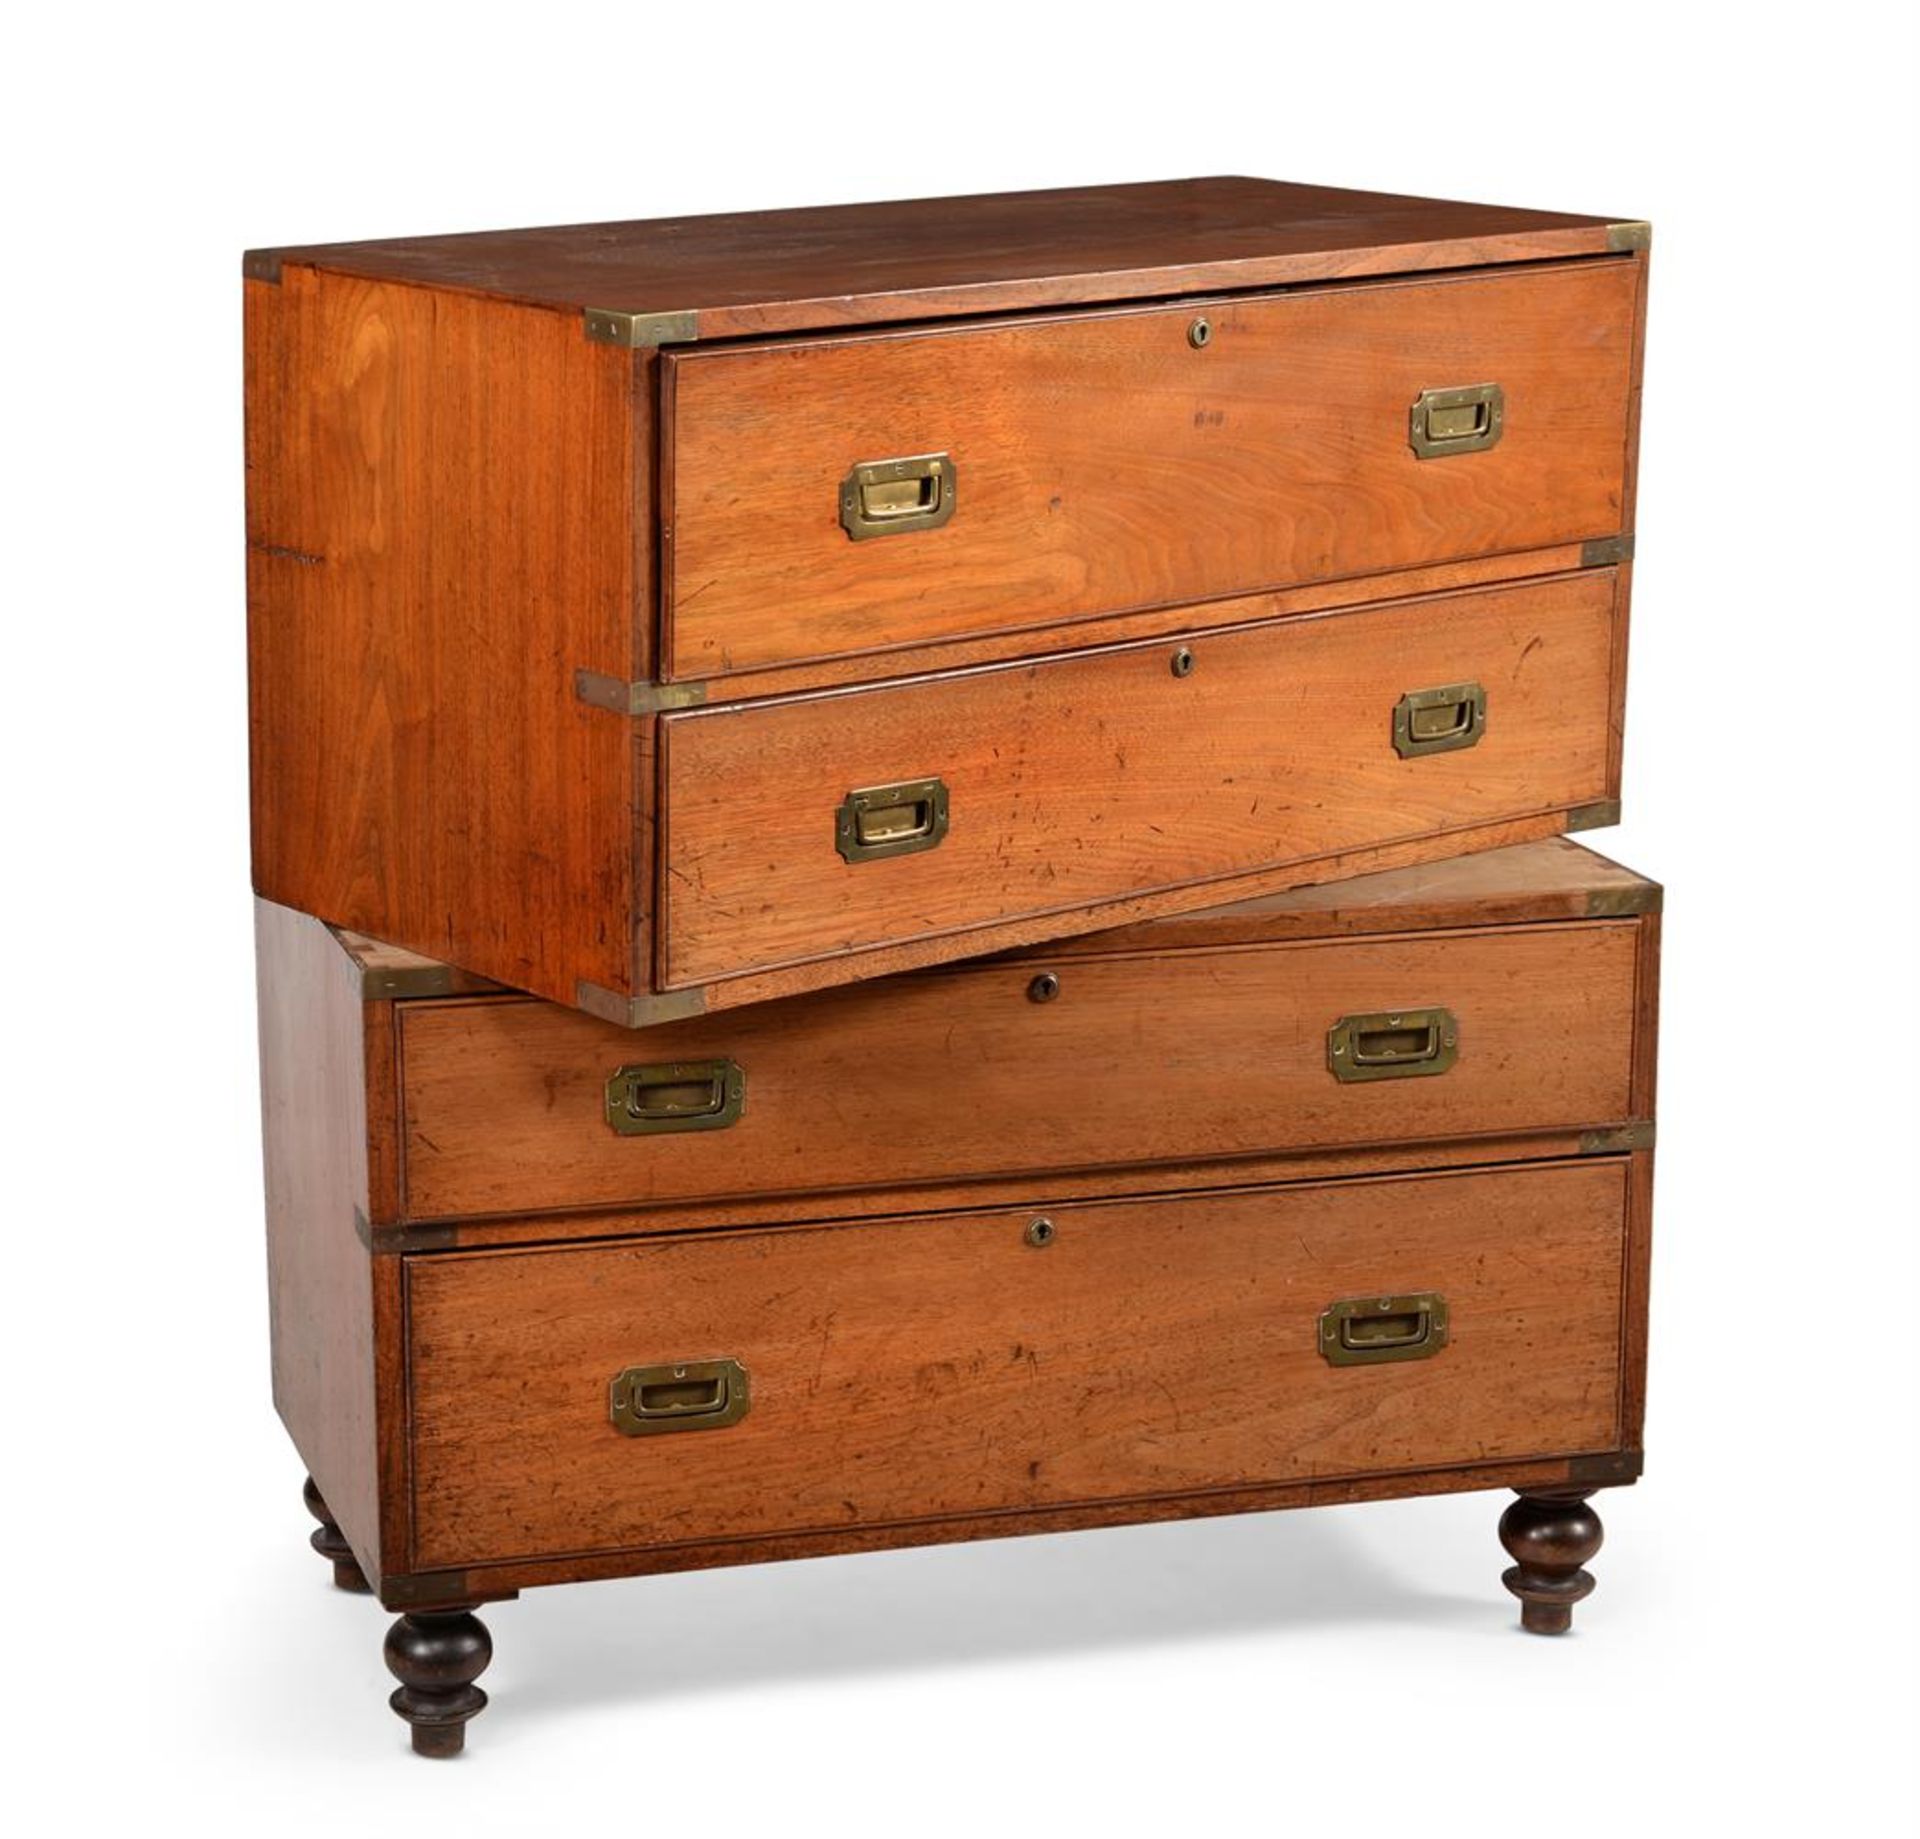 A VICTORIAN TEAK AND BRASS BOUND SECRETAIRE CAMPAIGN CHEST, BY T WHITE & CO, MID 19TH CENTURY - Image 4 of 6